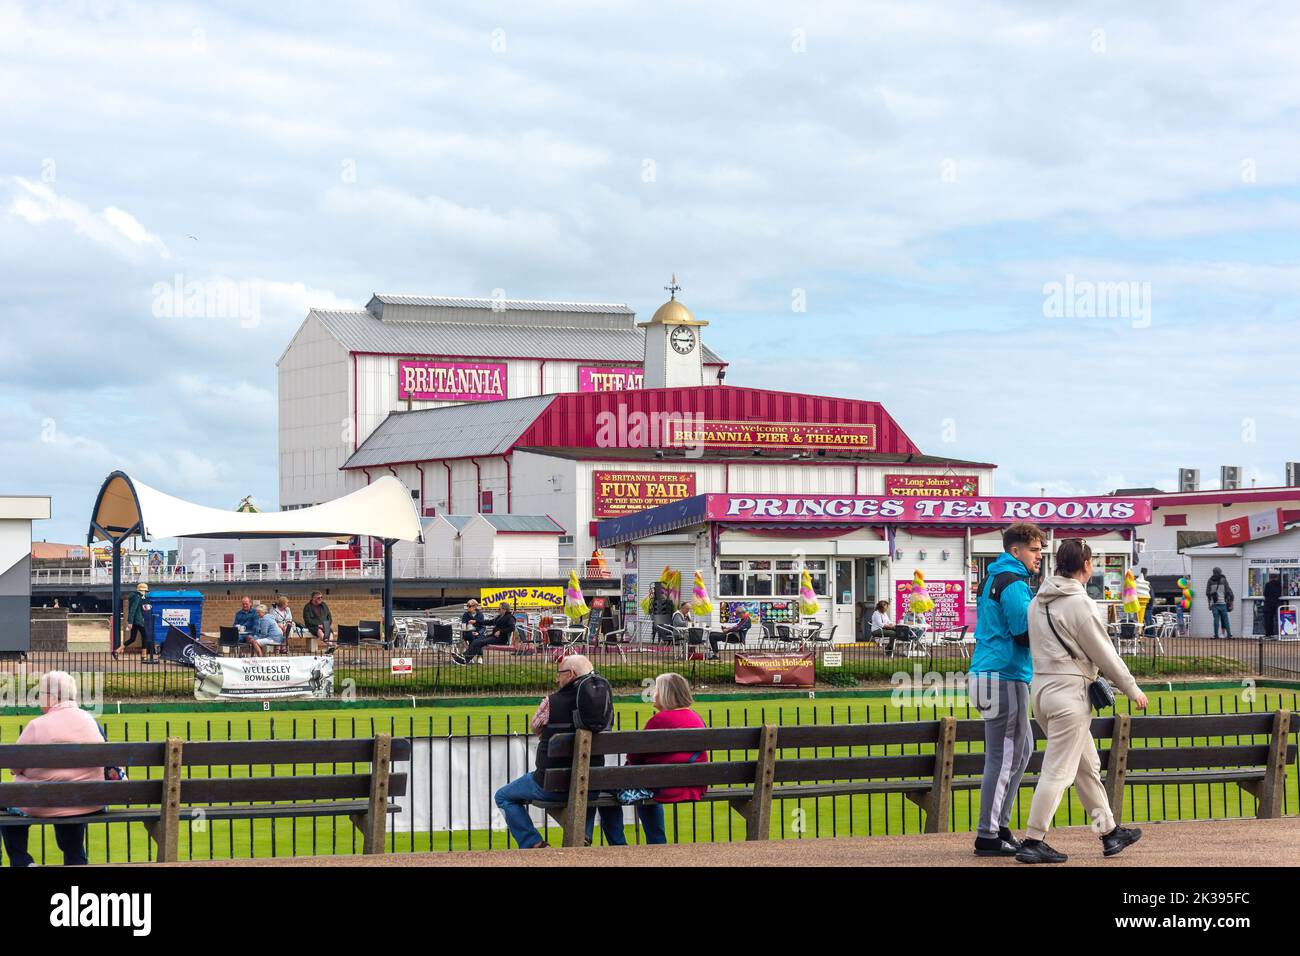 Brittania Pier and Bowling Green, Marine Parade, Great Yarmouth, Norfolk, England, Regno Unito Foto Stock